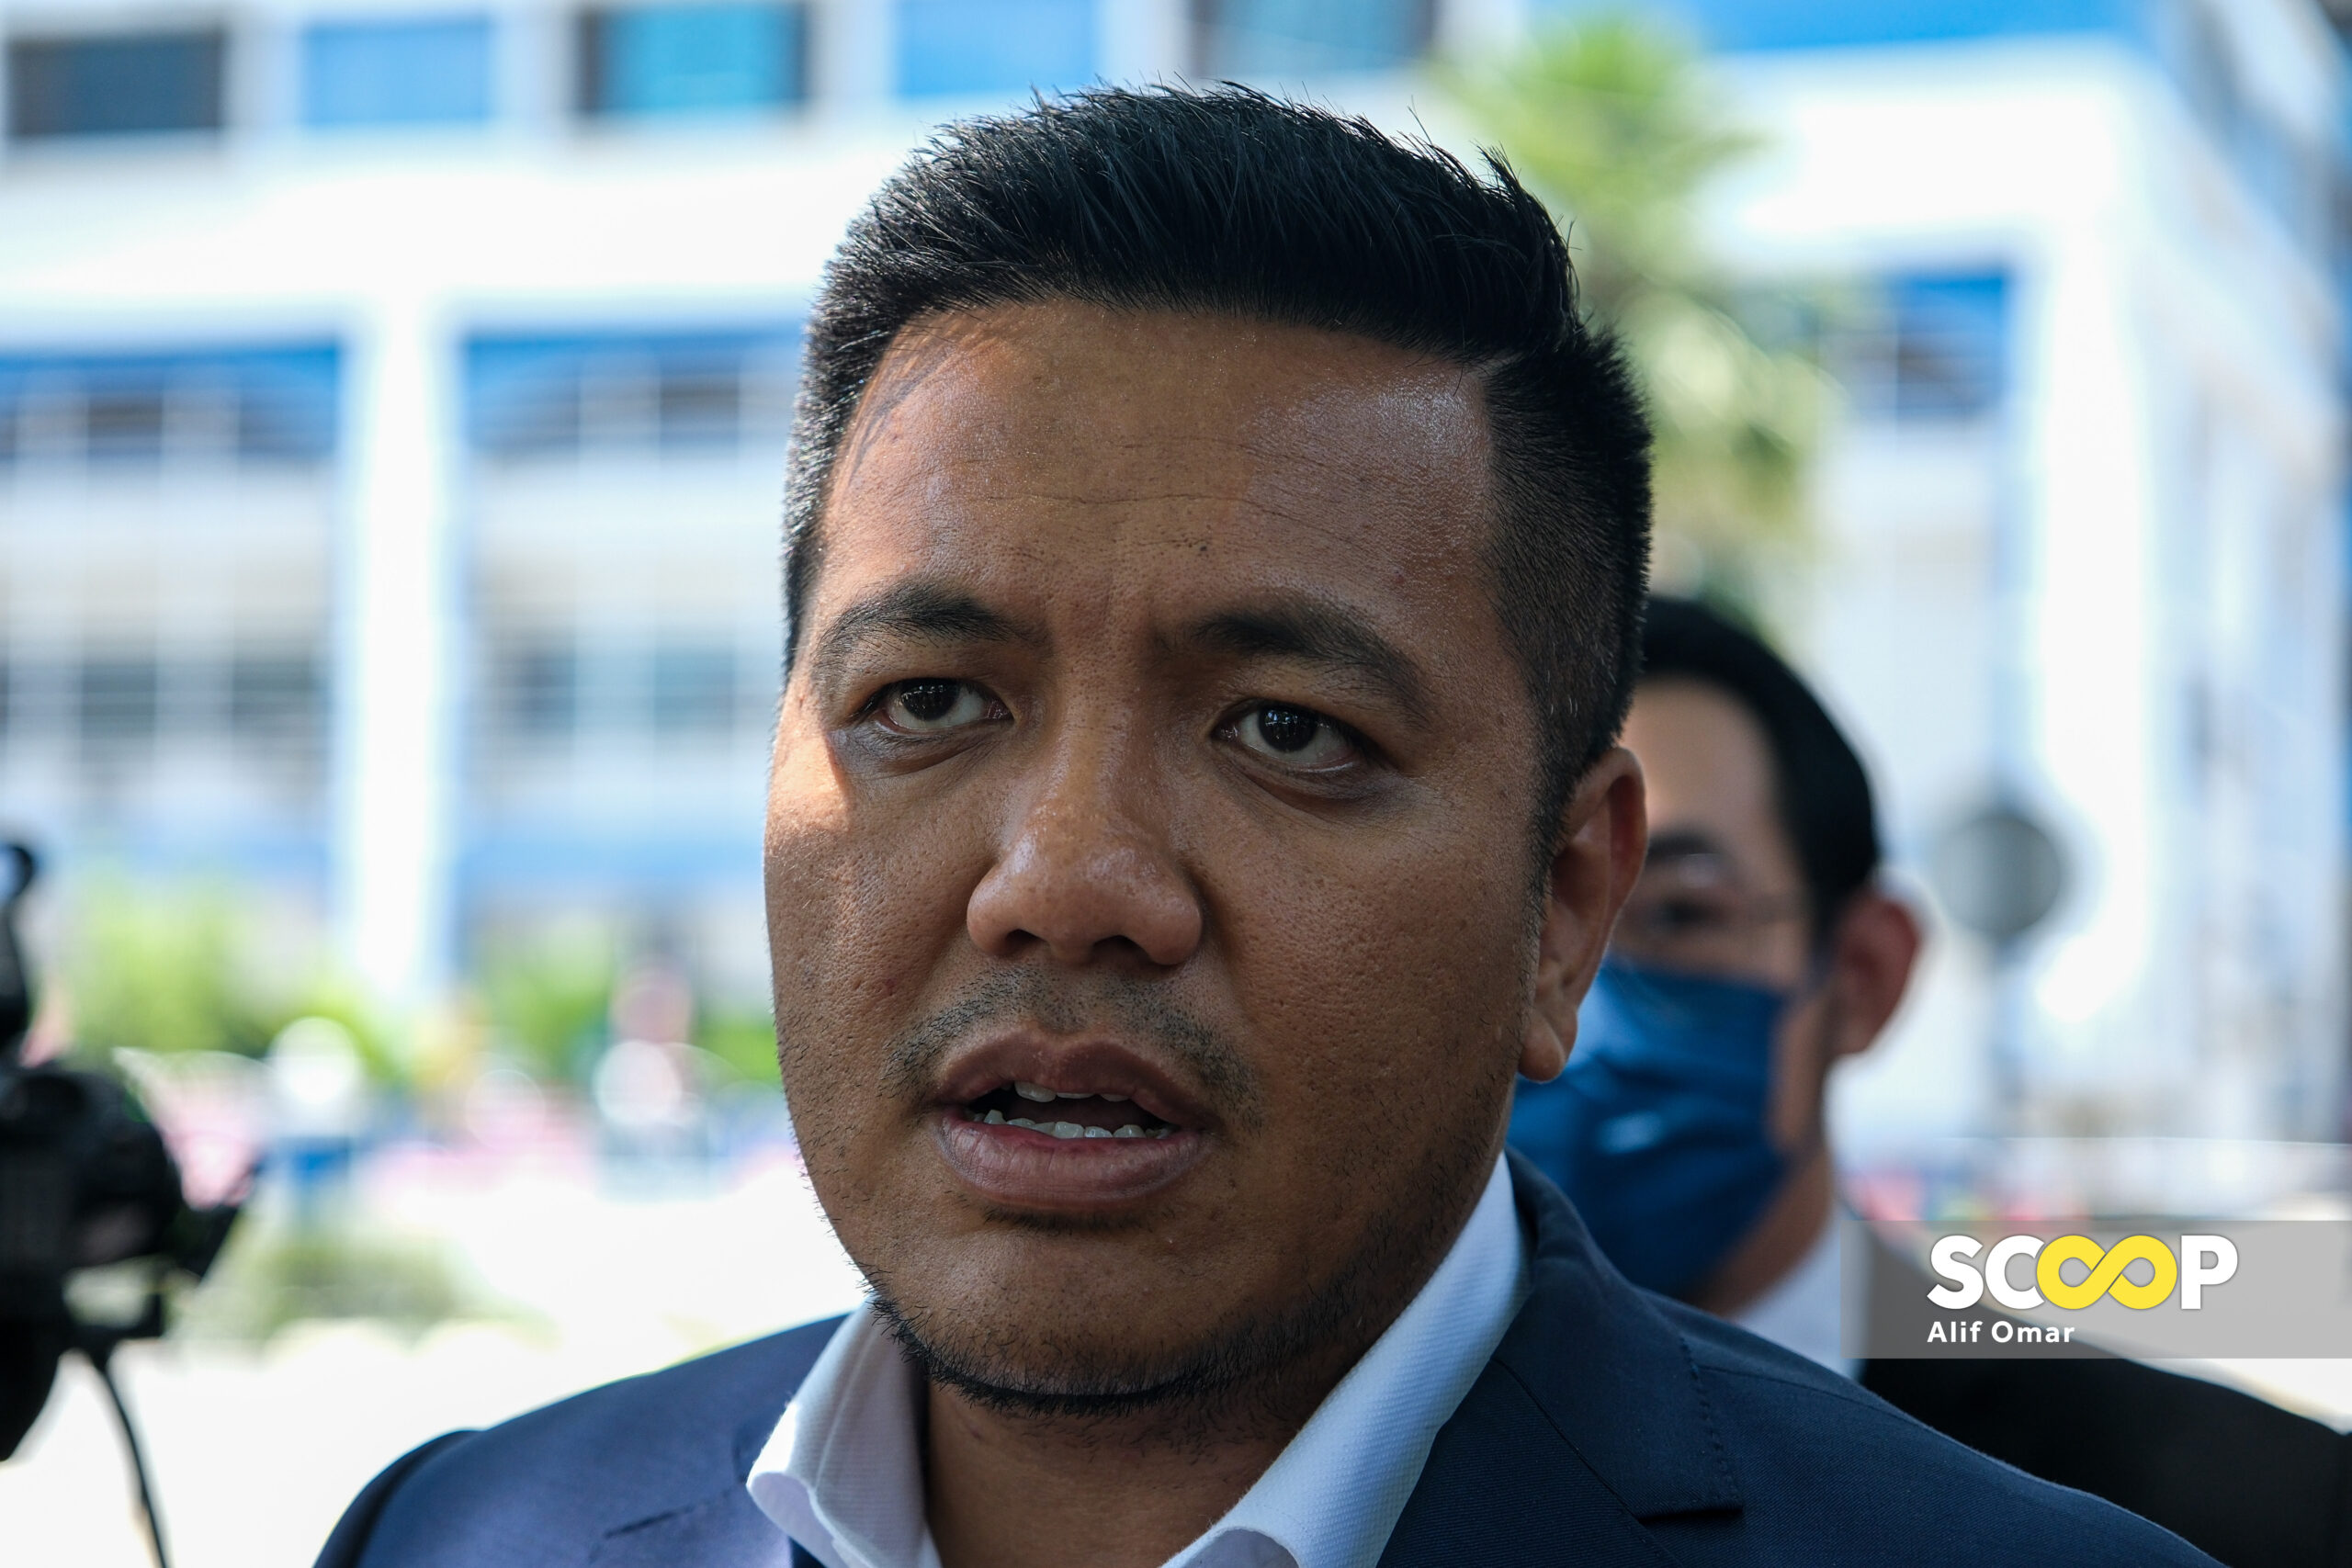 PJD Link would have solved ongoing traffic congestion in PJ, says Afif